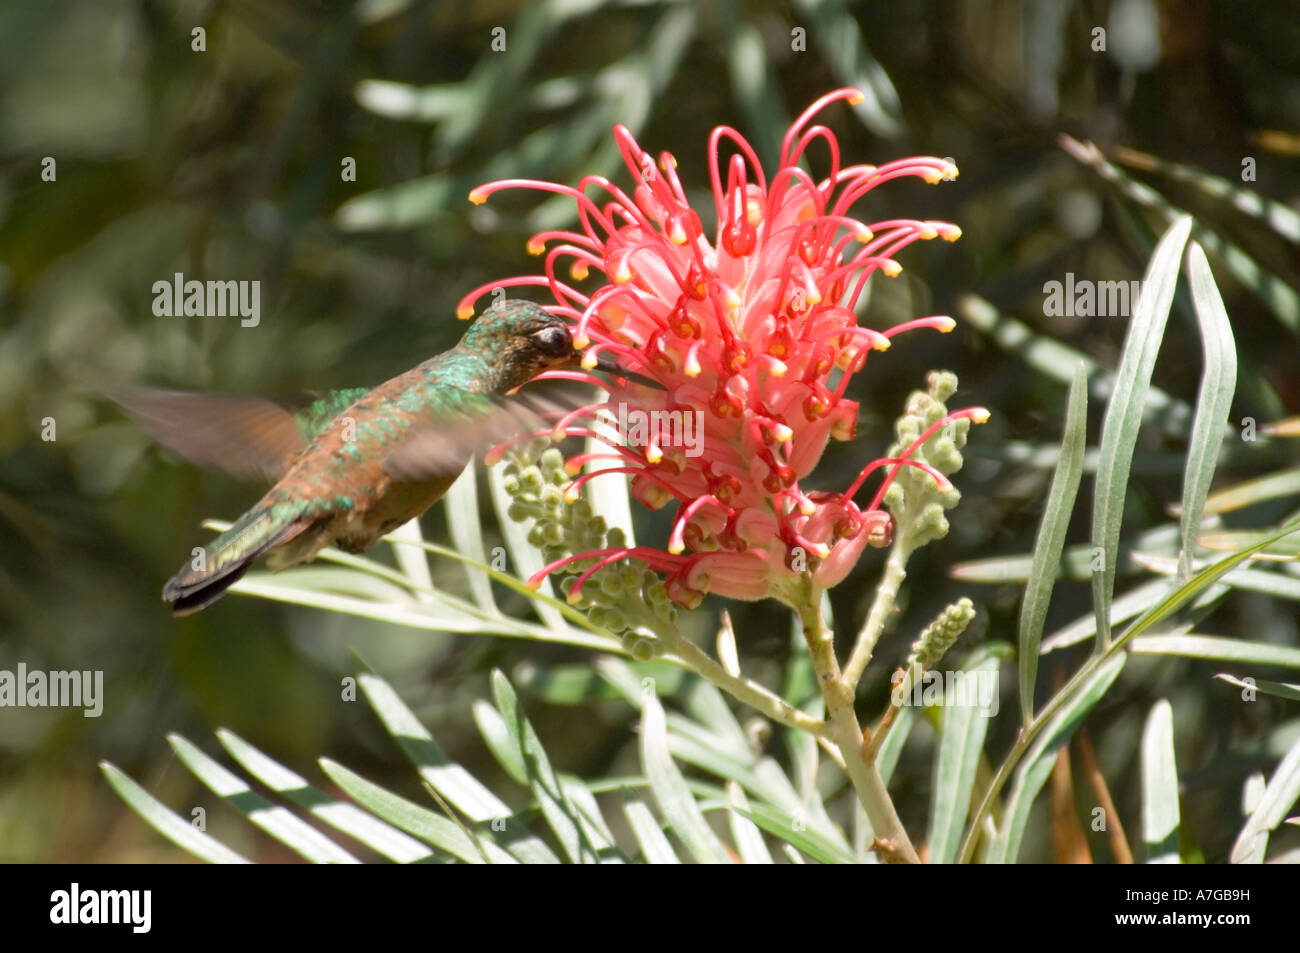 A Singing Hummingbird (Colibri Serrirostris) in flight about to take nectar from a Kahili flower (Grevillea Banksii). Stock Photo